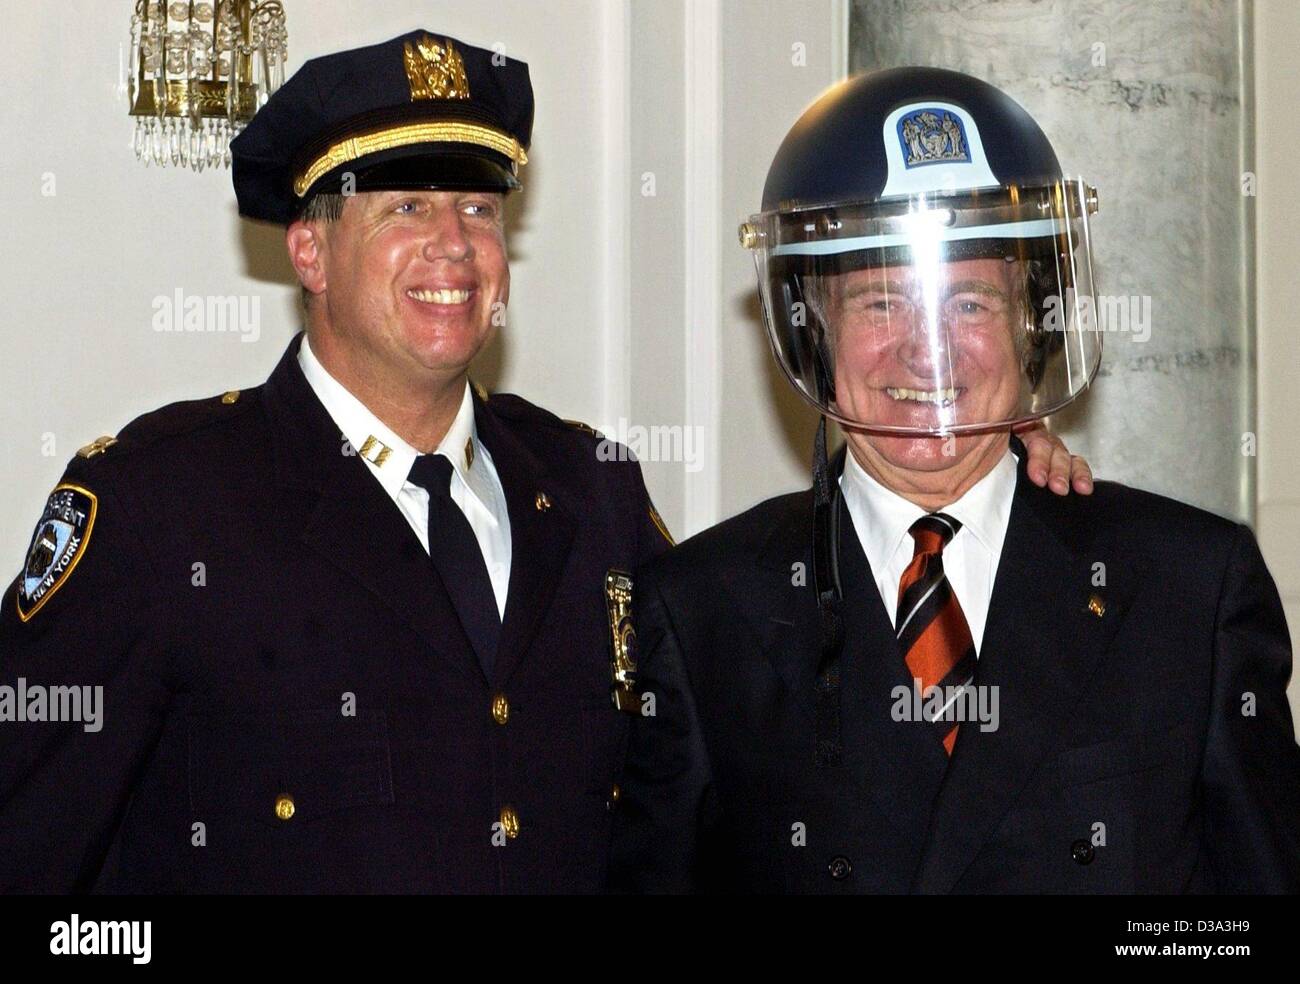 (dpa) - German President Johannes Rau (R) wears a helmet of the New York fire brigade, as he poses with New York police officer Jimmy Albrecht in his residence, the palace 'Bellevue' in Berlin, 20 June 2002. The helmet was a present of the police and firemen, who had worked on Ground Zero on the day Stock Photo